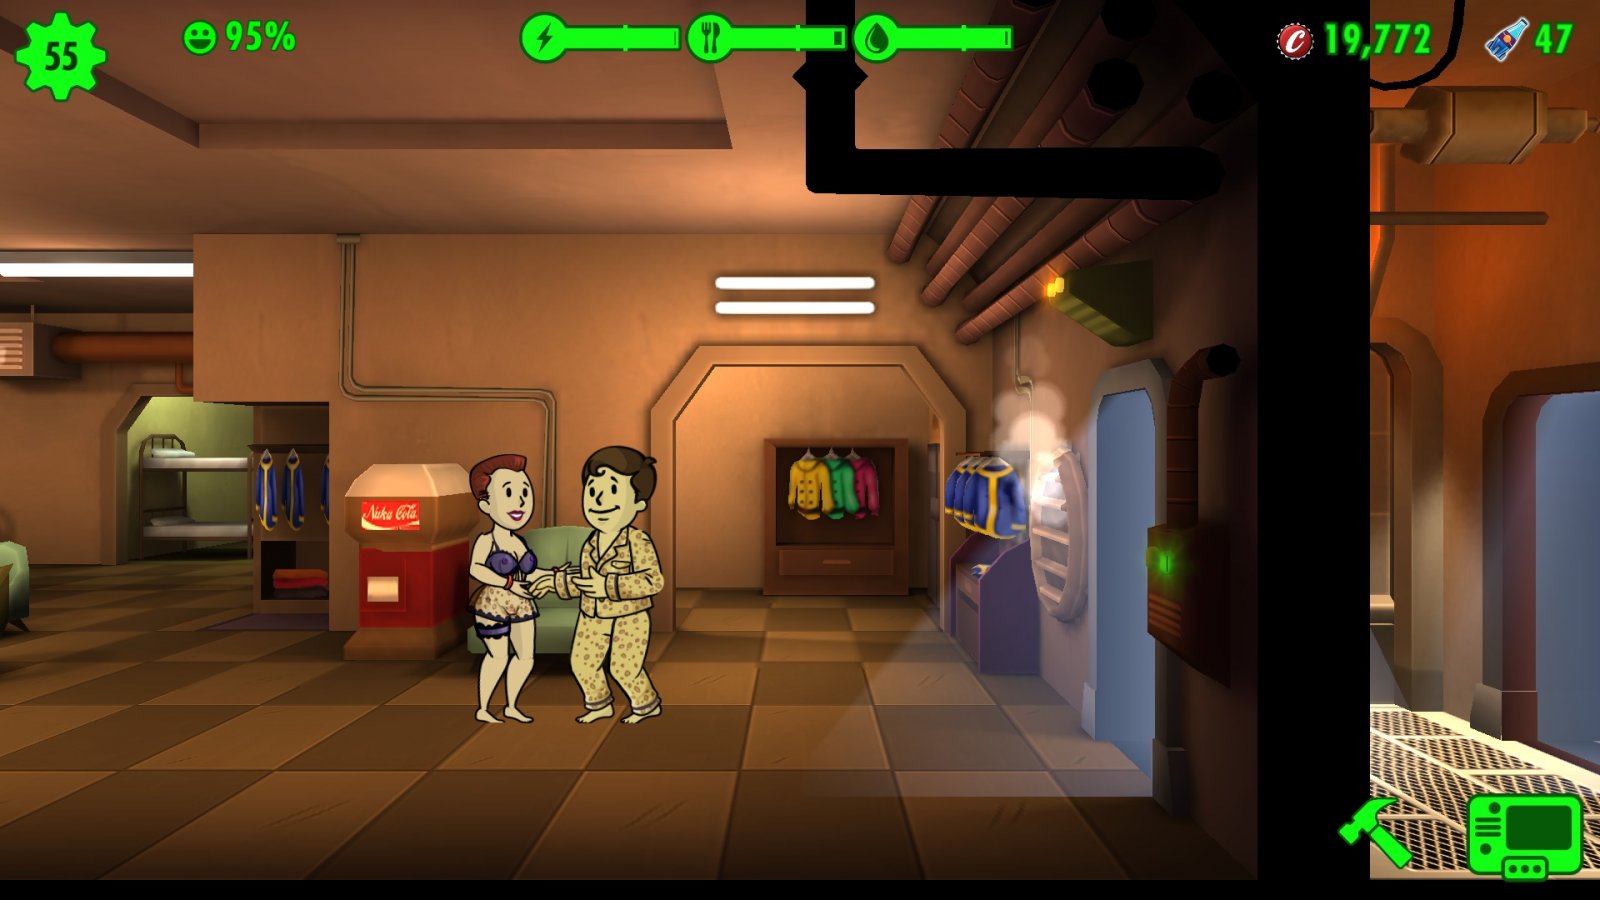 Fallout Shelter Pc Mods